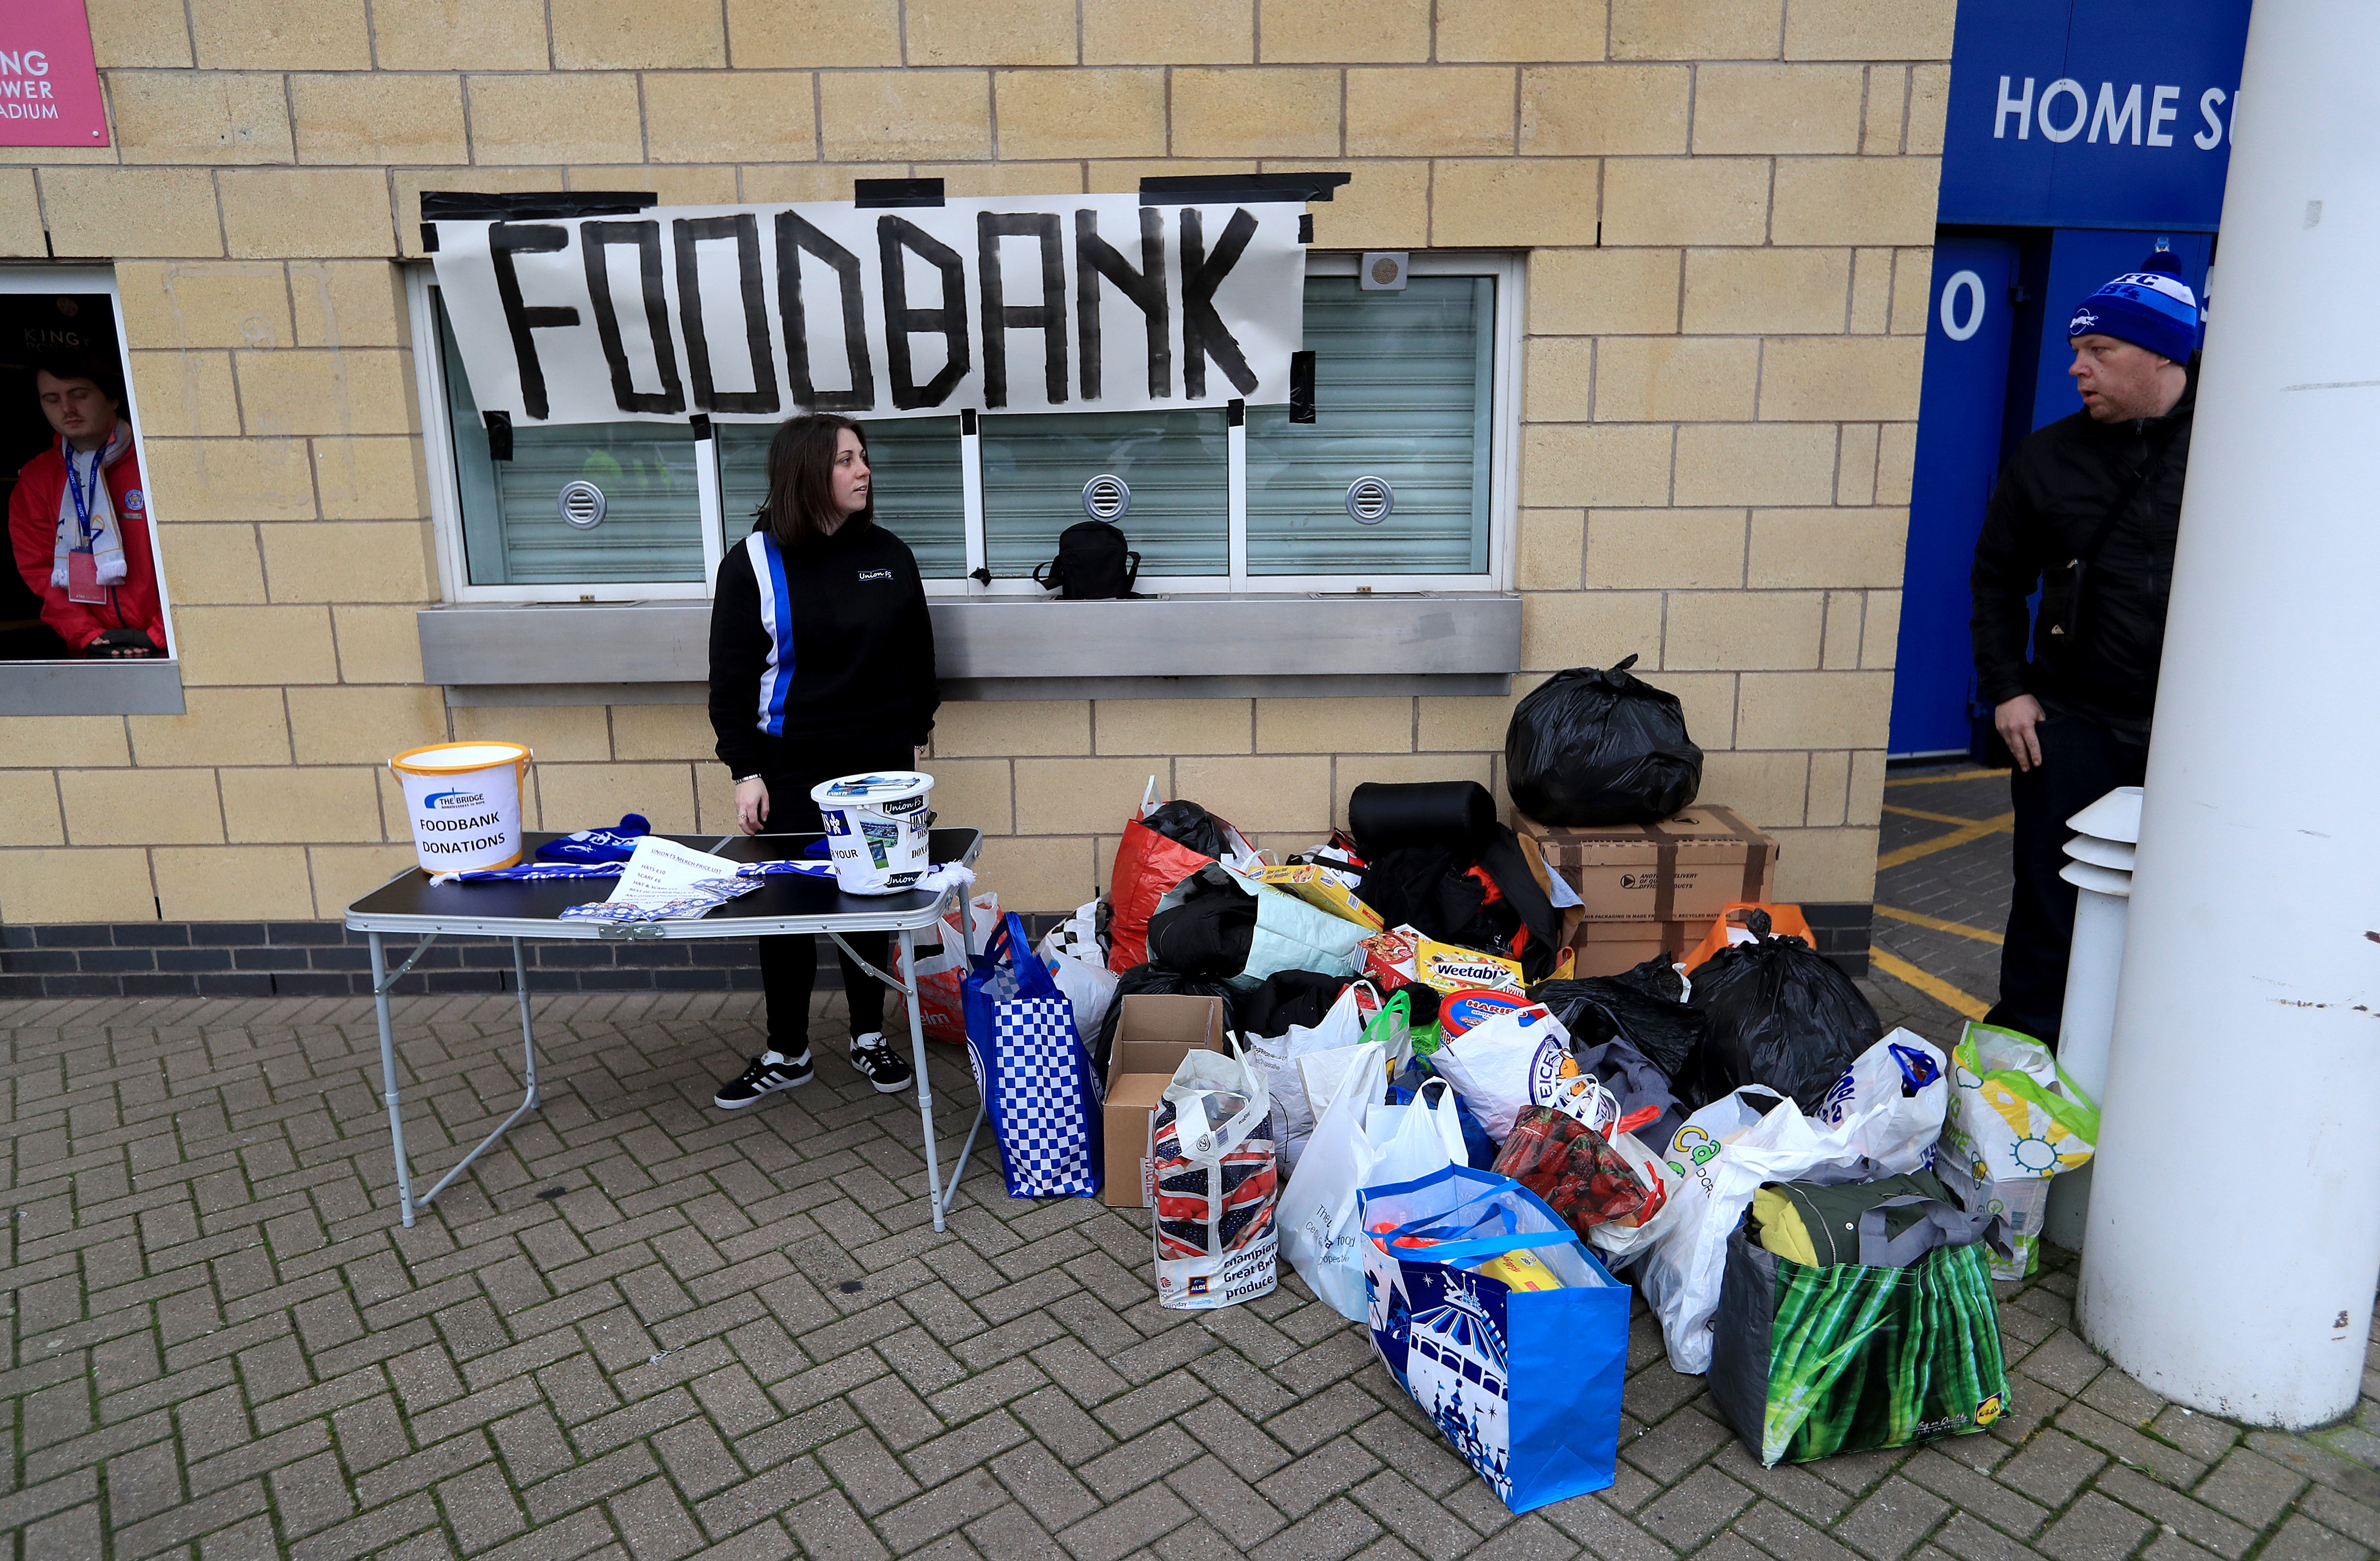 Premier League clubs will donate unused food to good causes (Luciana Guerra/PA)